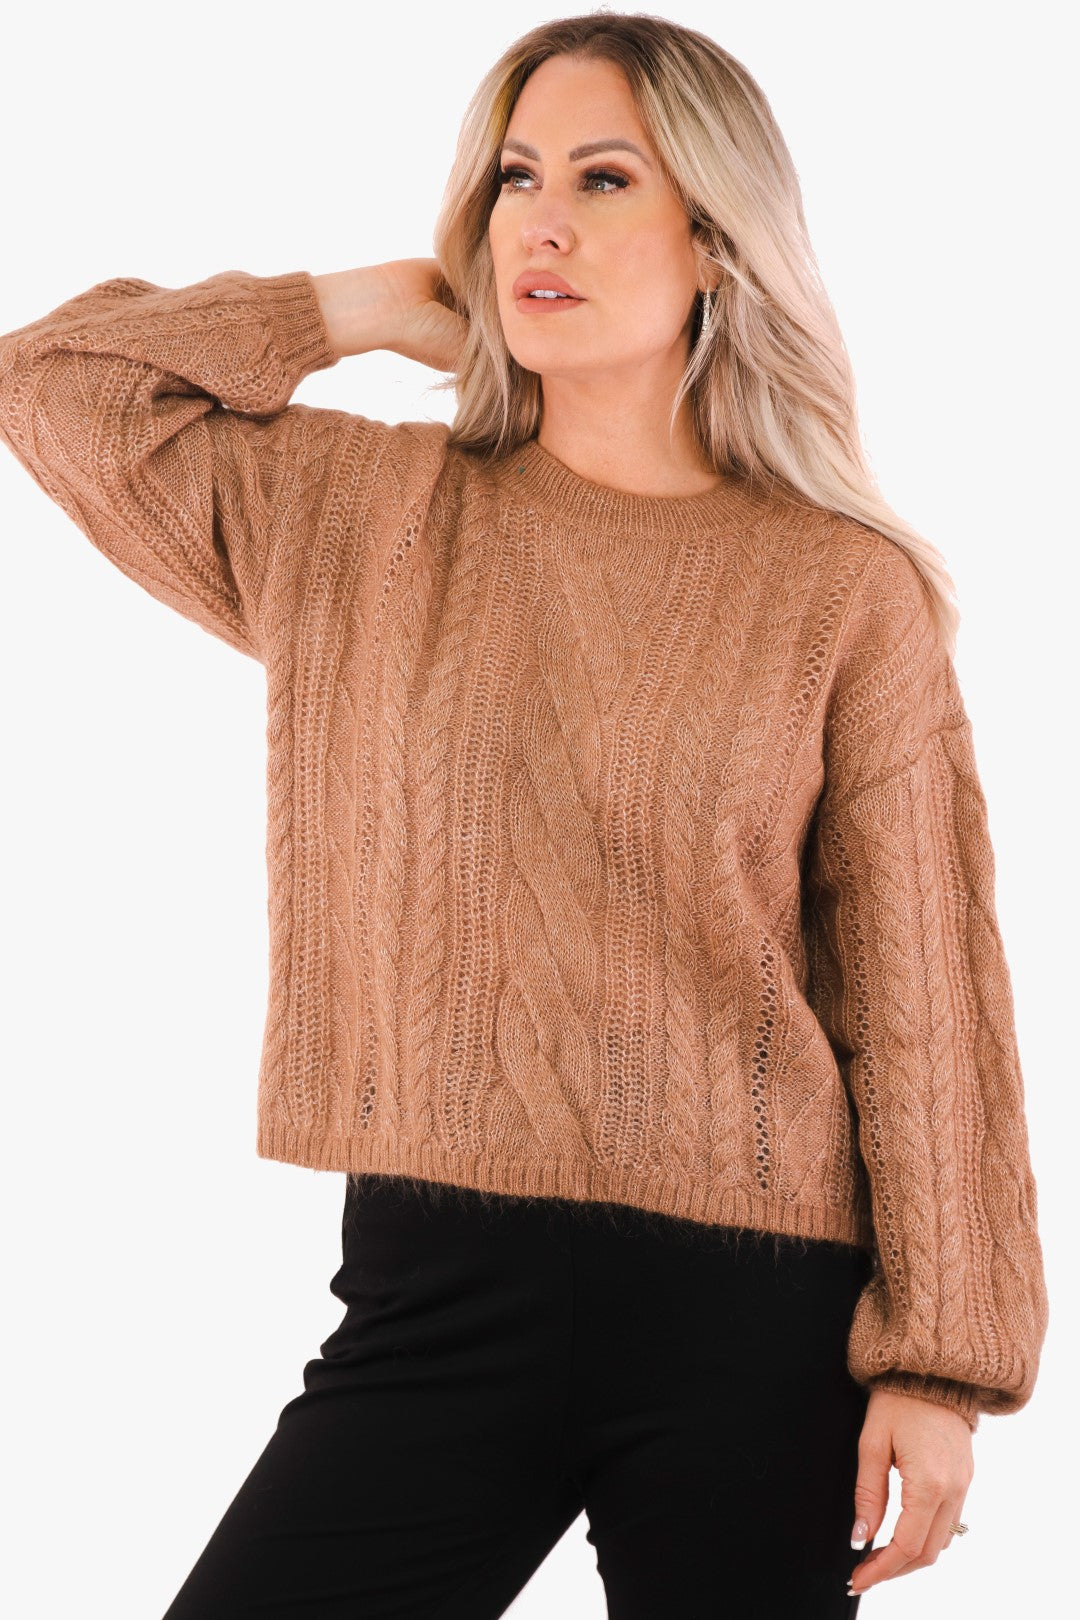 Caramel Part Two Sweater